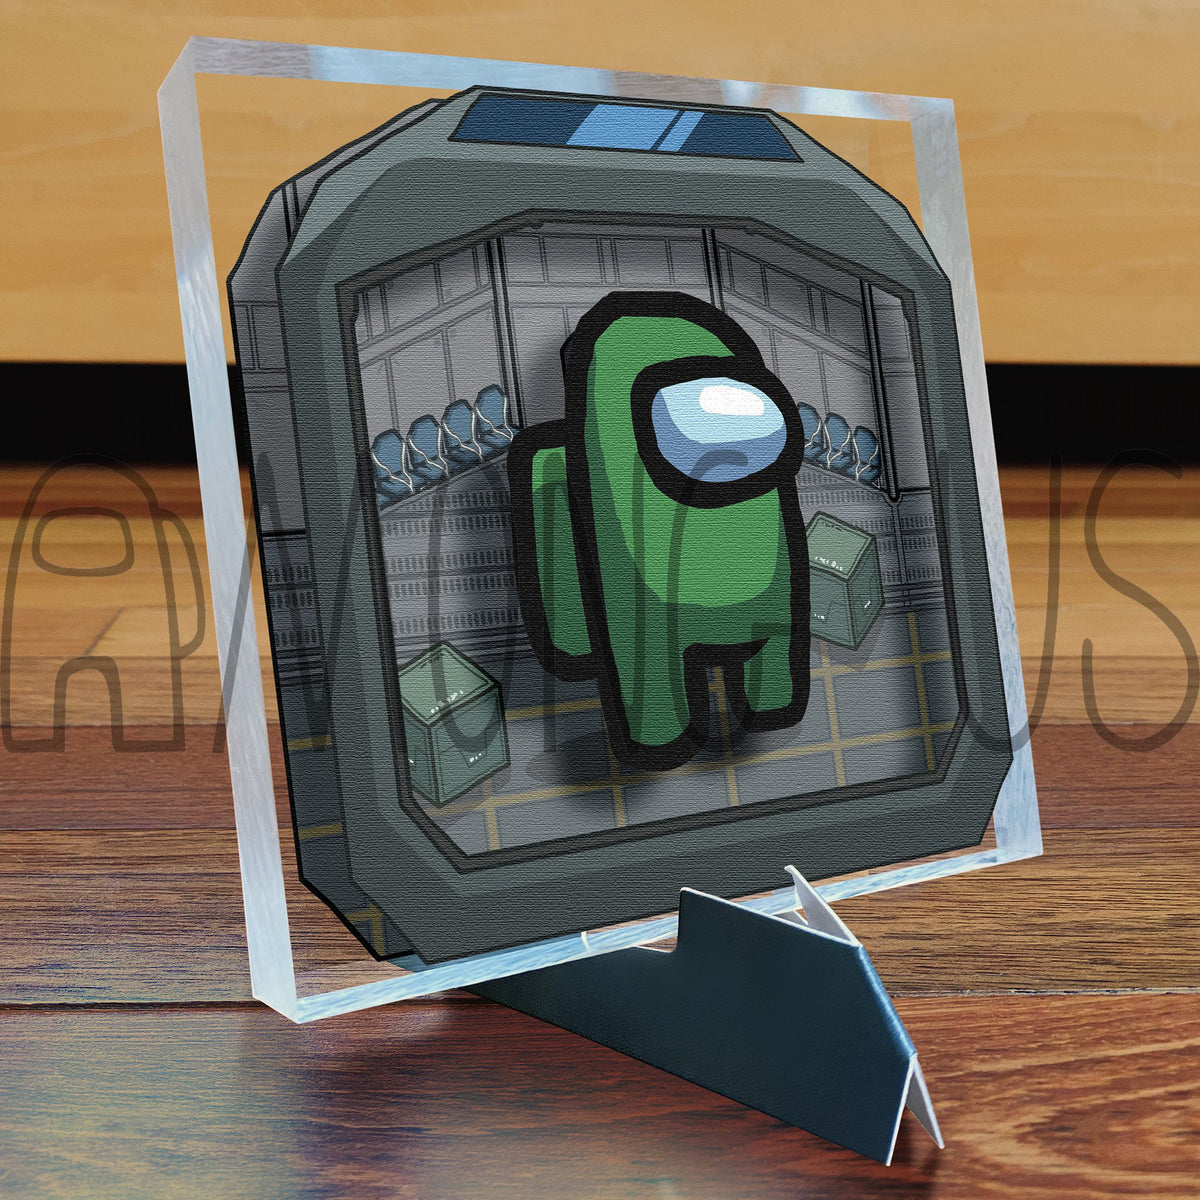 A photograph of the green Crewmate Art Tile displayed on its art tile stand.